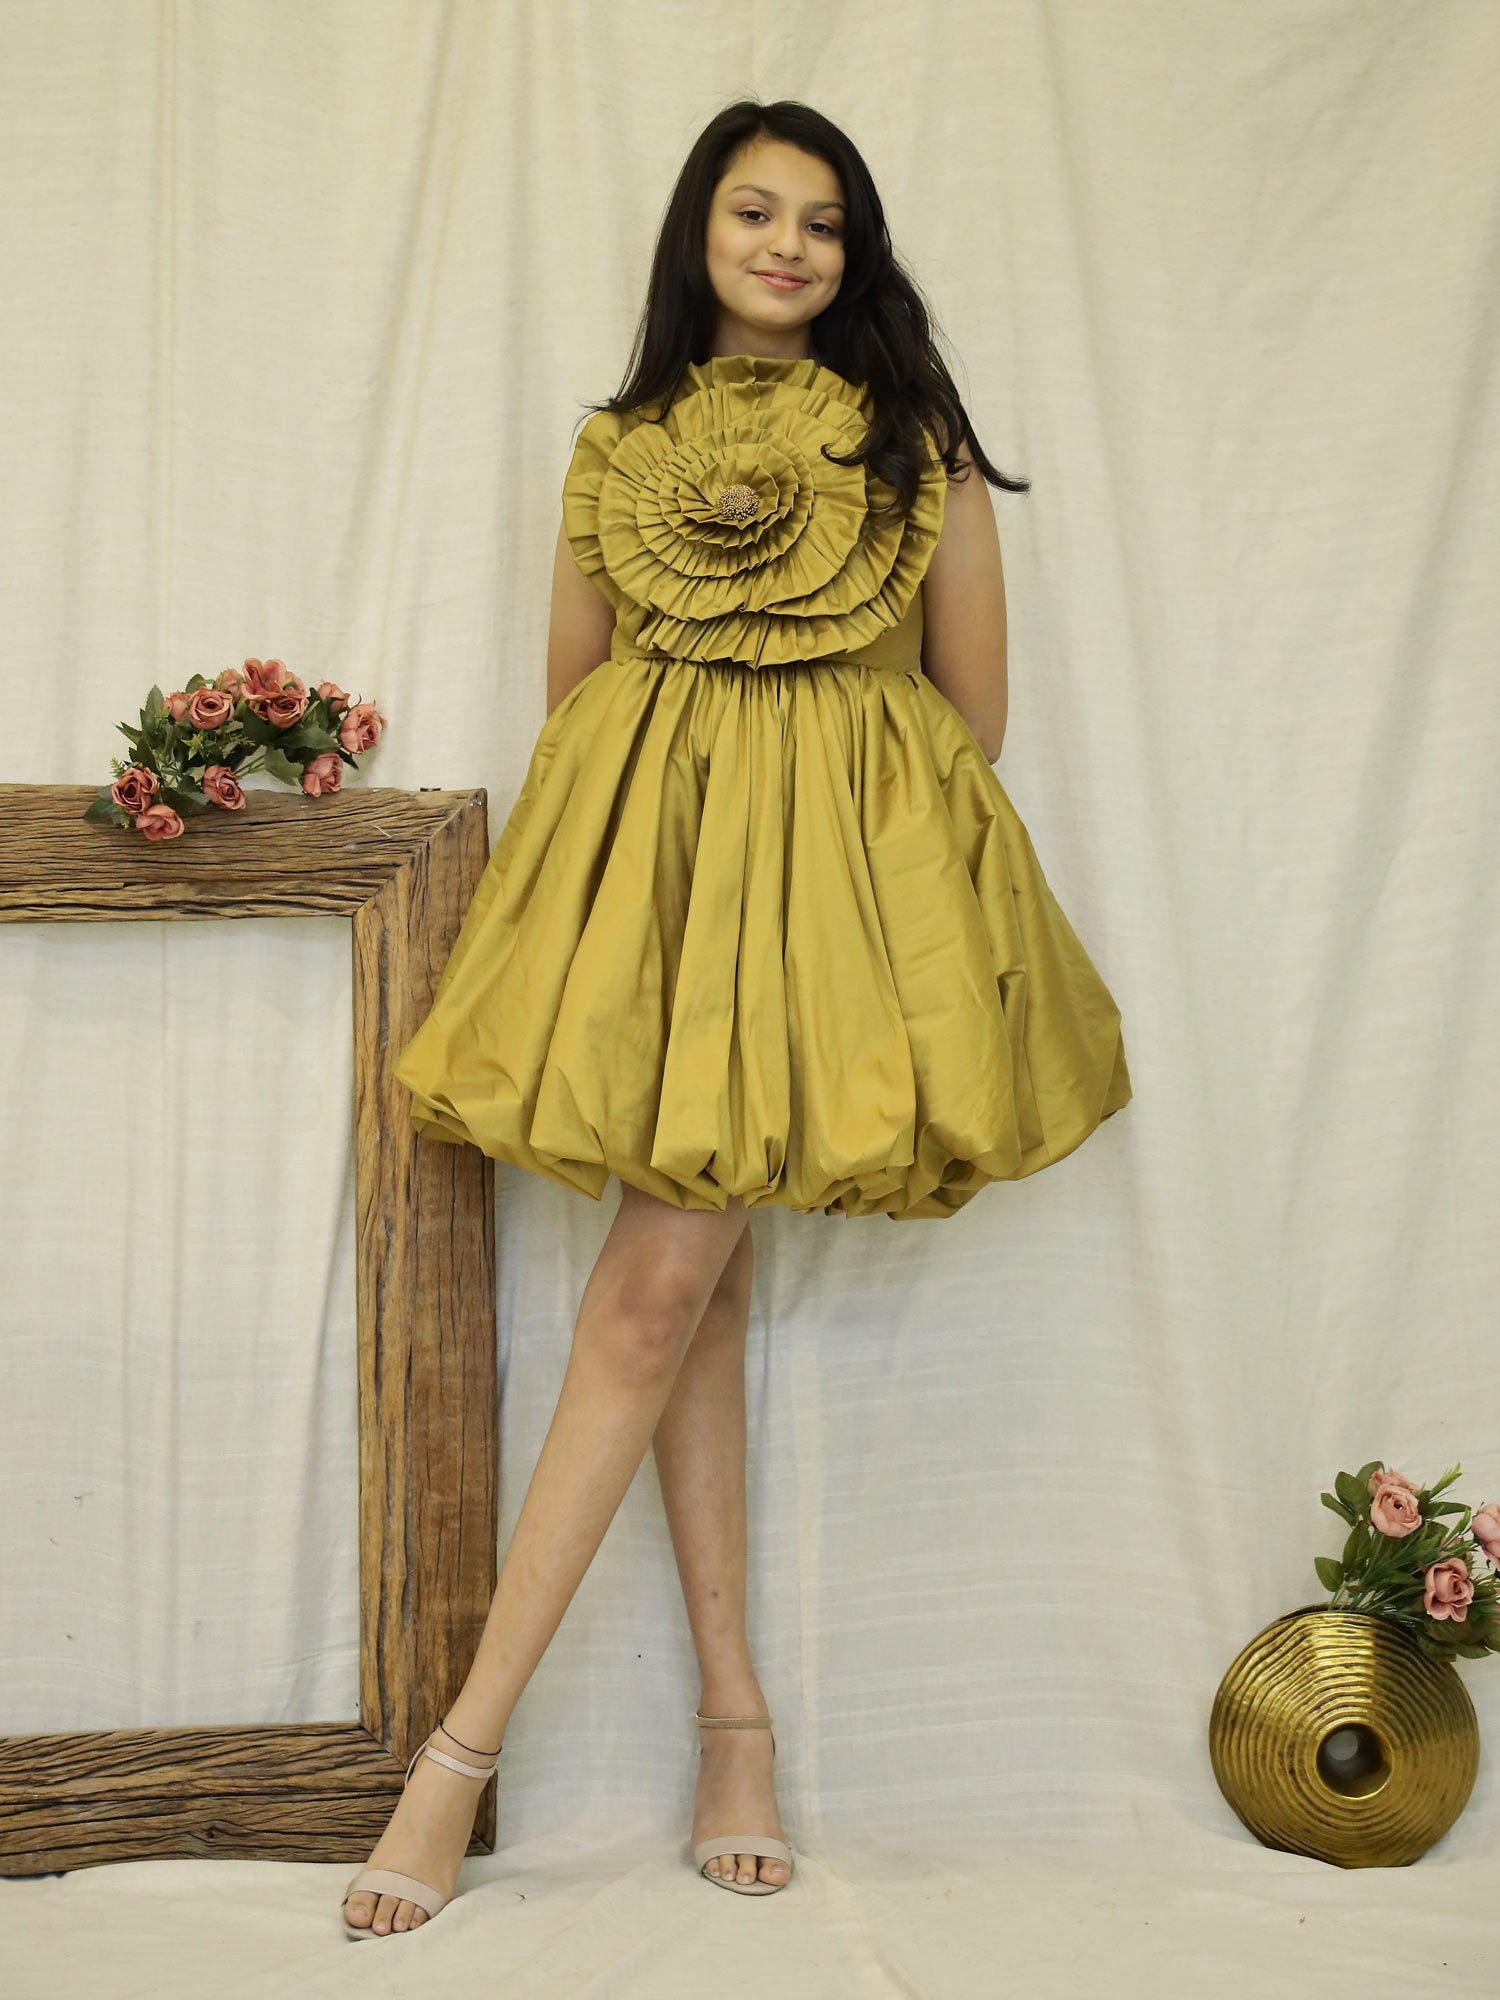 Golden Drape Girls Party Dress with Hair Accessory